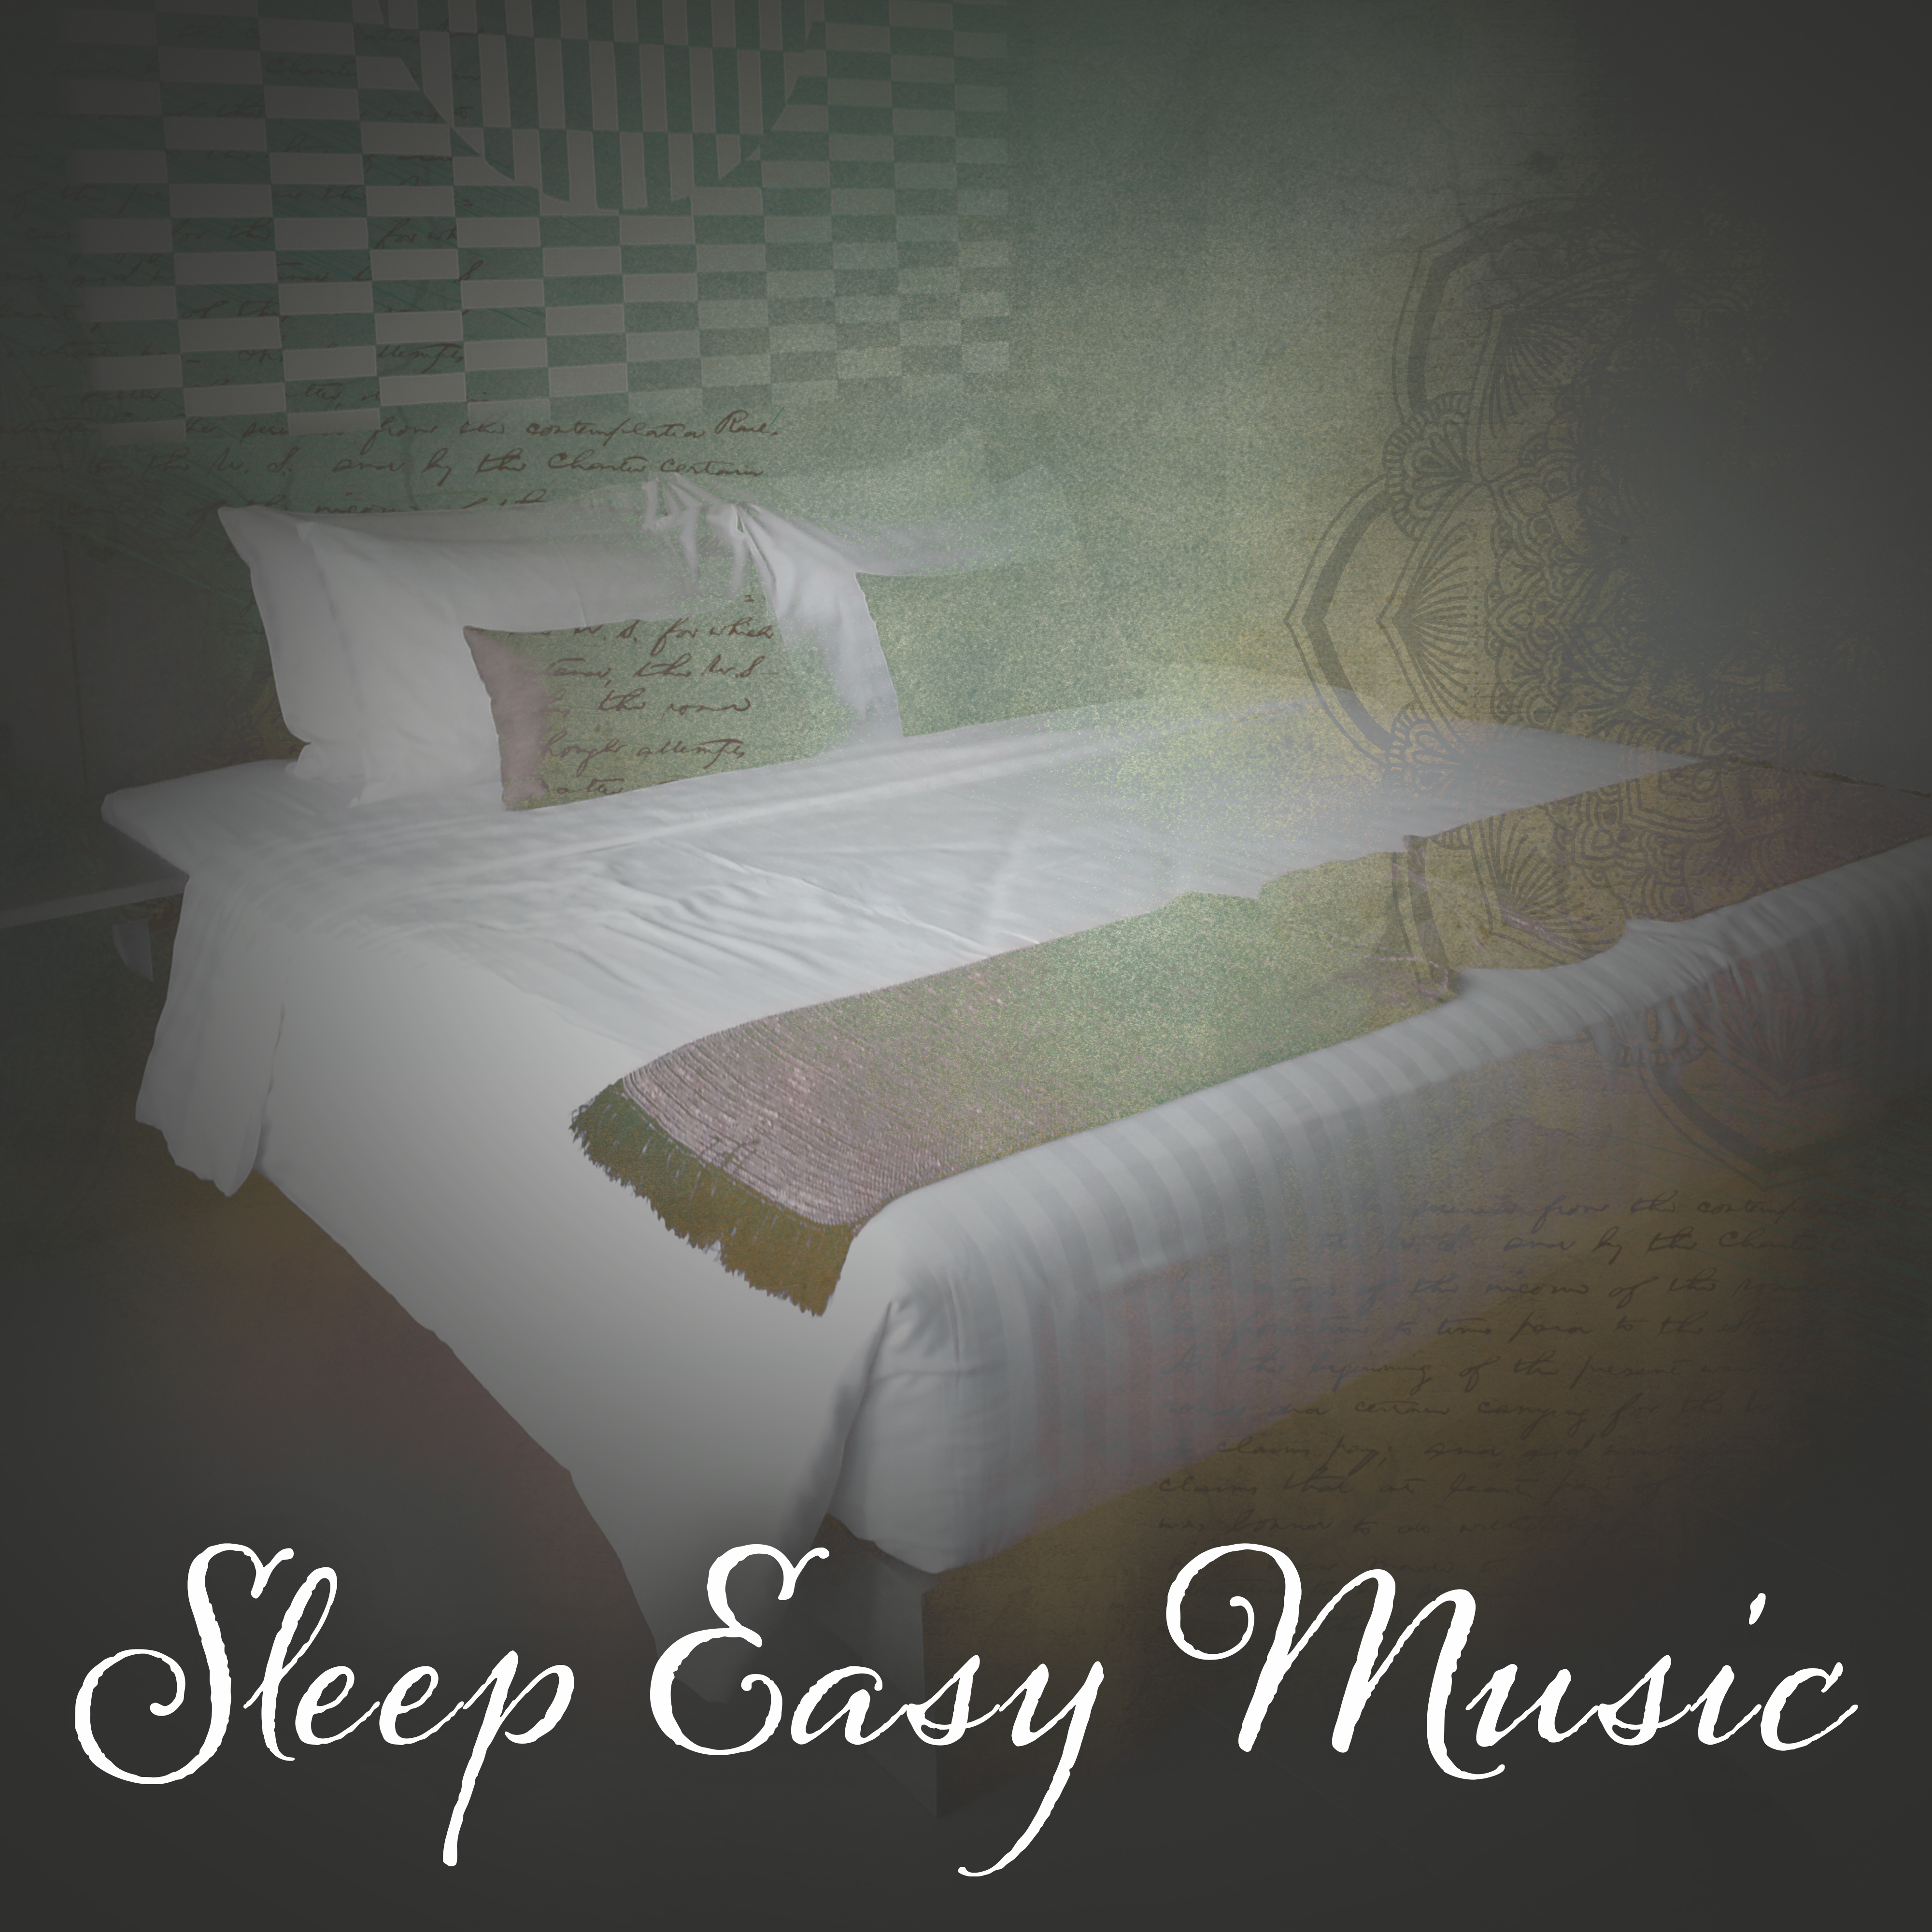 Sleep Easy Music  Soothing Songs at Goodnight, Pure Sleep, Sweet Dreams, Lullabies, Tranquility, Relaxing Therapy for Mind